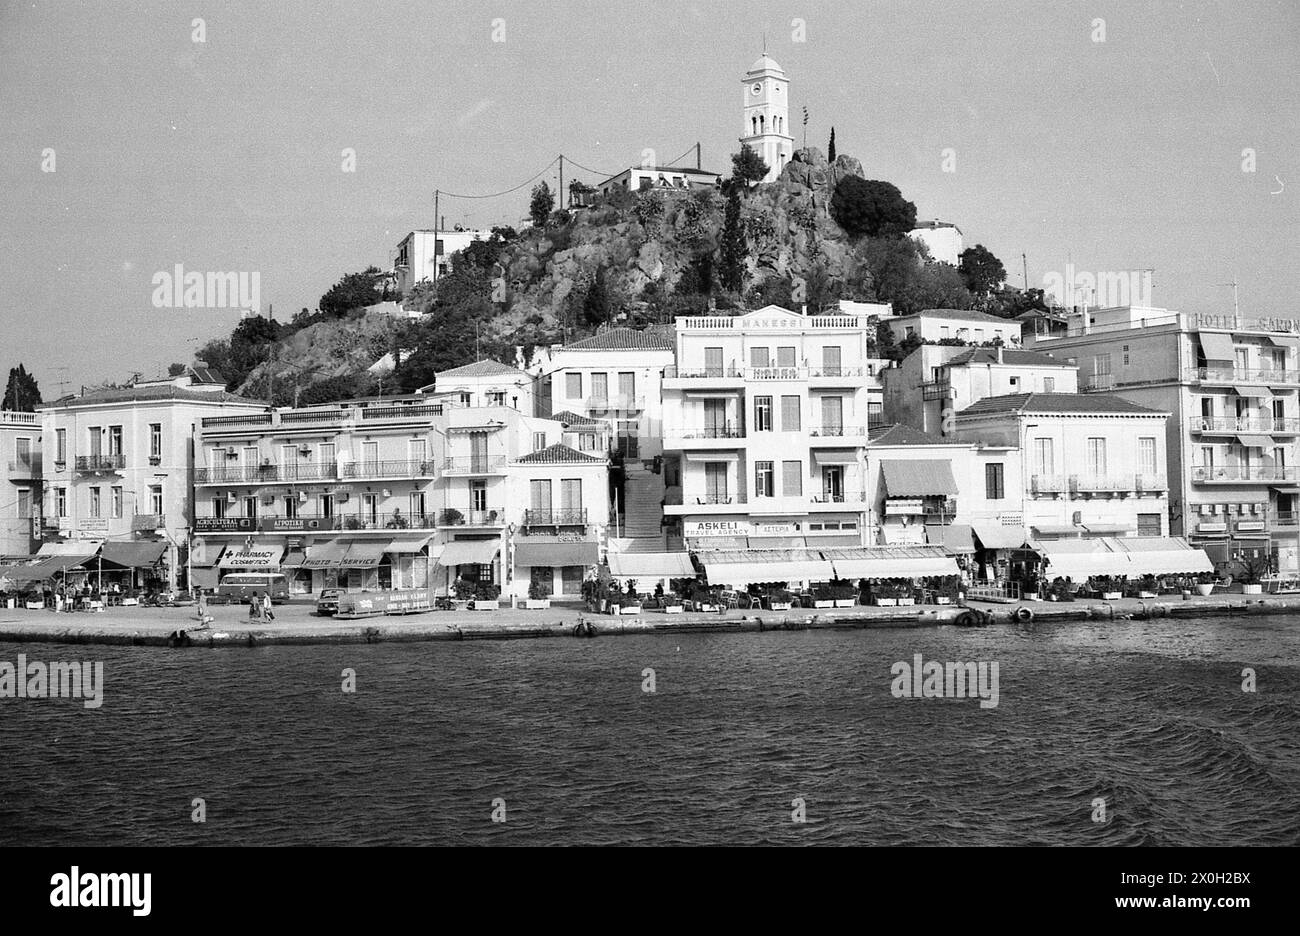 Old town and clock tower on the island of Poros in the Saronic Gulf. Stock Photo